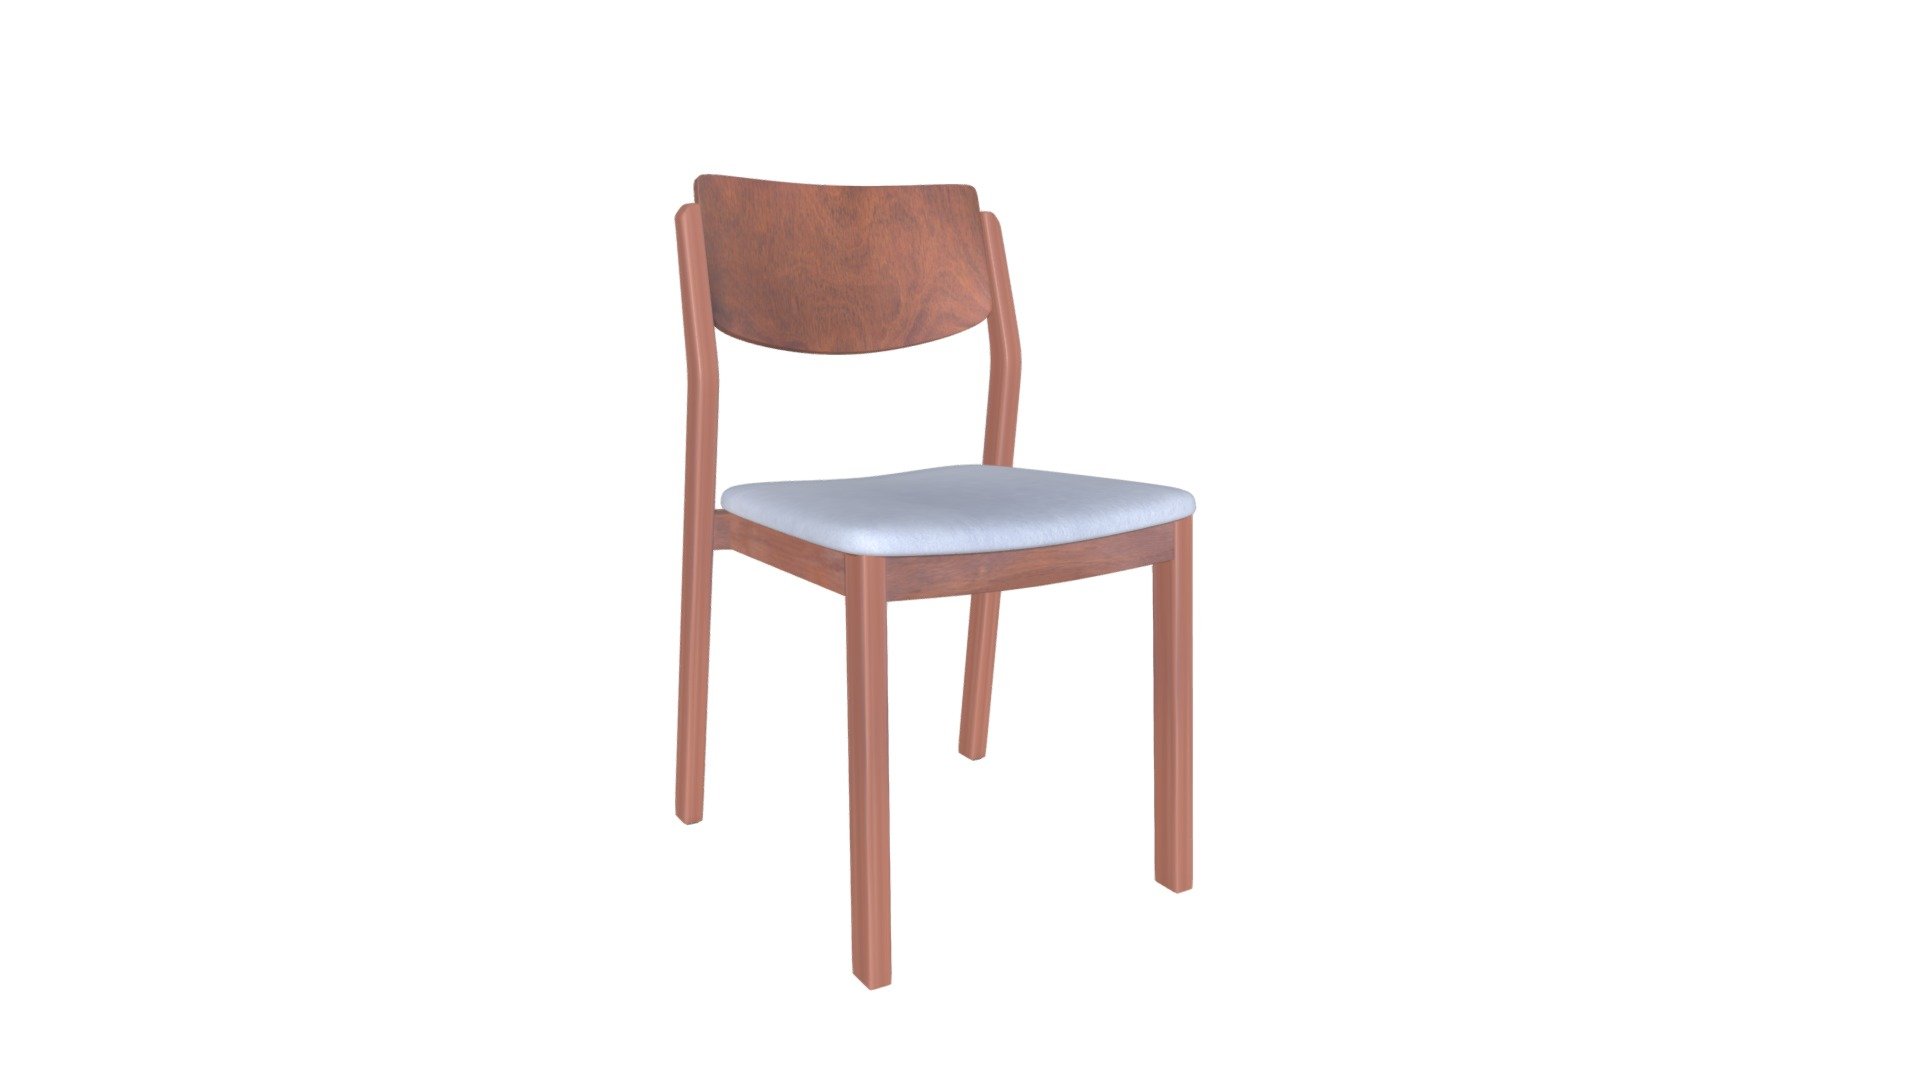 https://www.zuomod.com/109213-desdamona-dining-chair-light-gray-walnut
The Desdamona Dining Chair is made with a solid rubber wood frame with wood veneer and polyester wrapped cushion. This Mid-Century Modern shaped chair works in any style of design space: urban minimal or boho chic 3d model